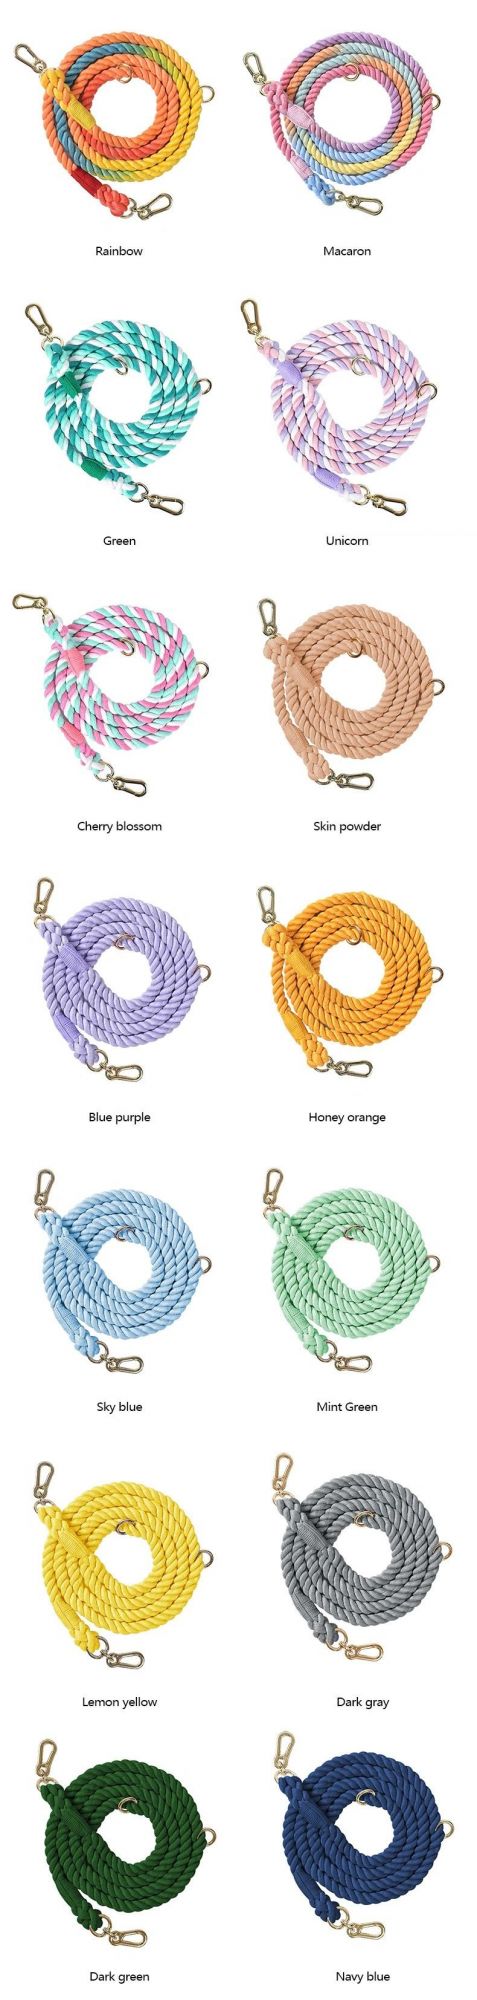 Factory Wholesale High Quality Dog Rope Lead Dog Harness